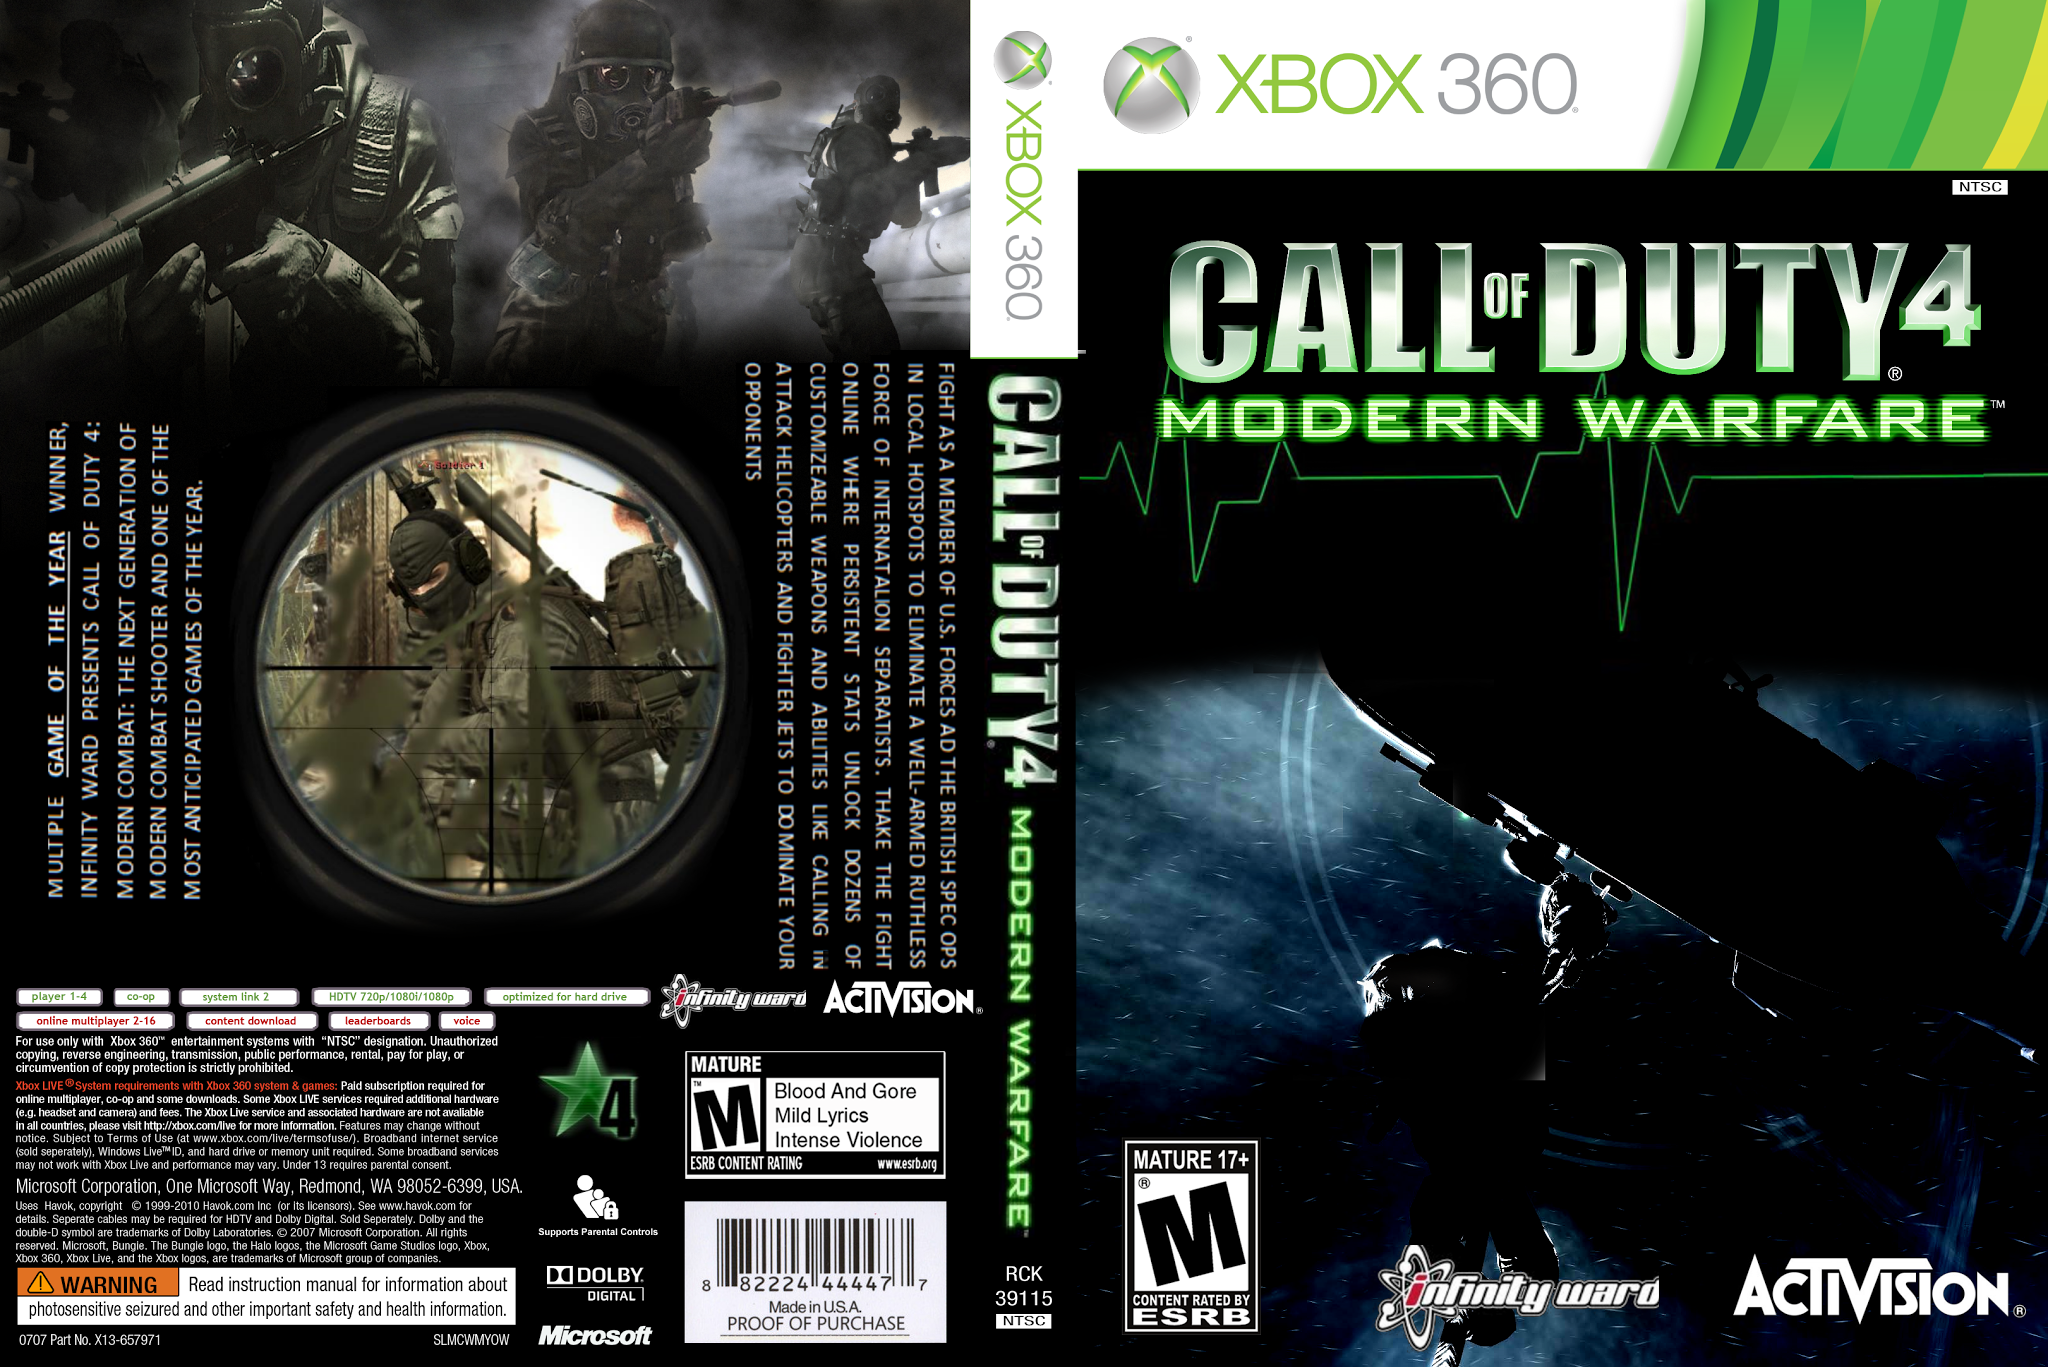 Xbox series s call of duty. Call of Duty 4 Xbox 360 диск. Диск Cod 4 MW Xbox 360. Call of Duty 4 Modern Warfare диск Xbox 360. Call of Duty Modern Warfare 1 диск на Xbox 360.